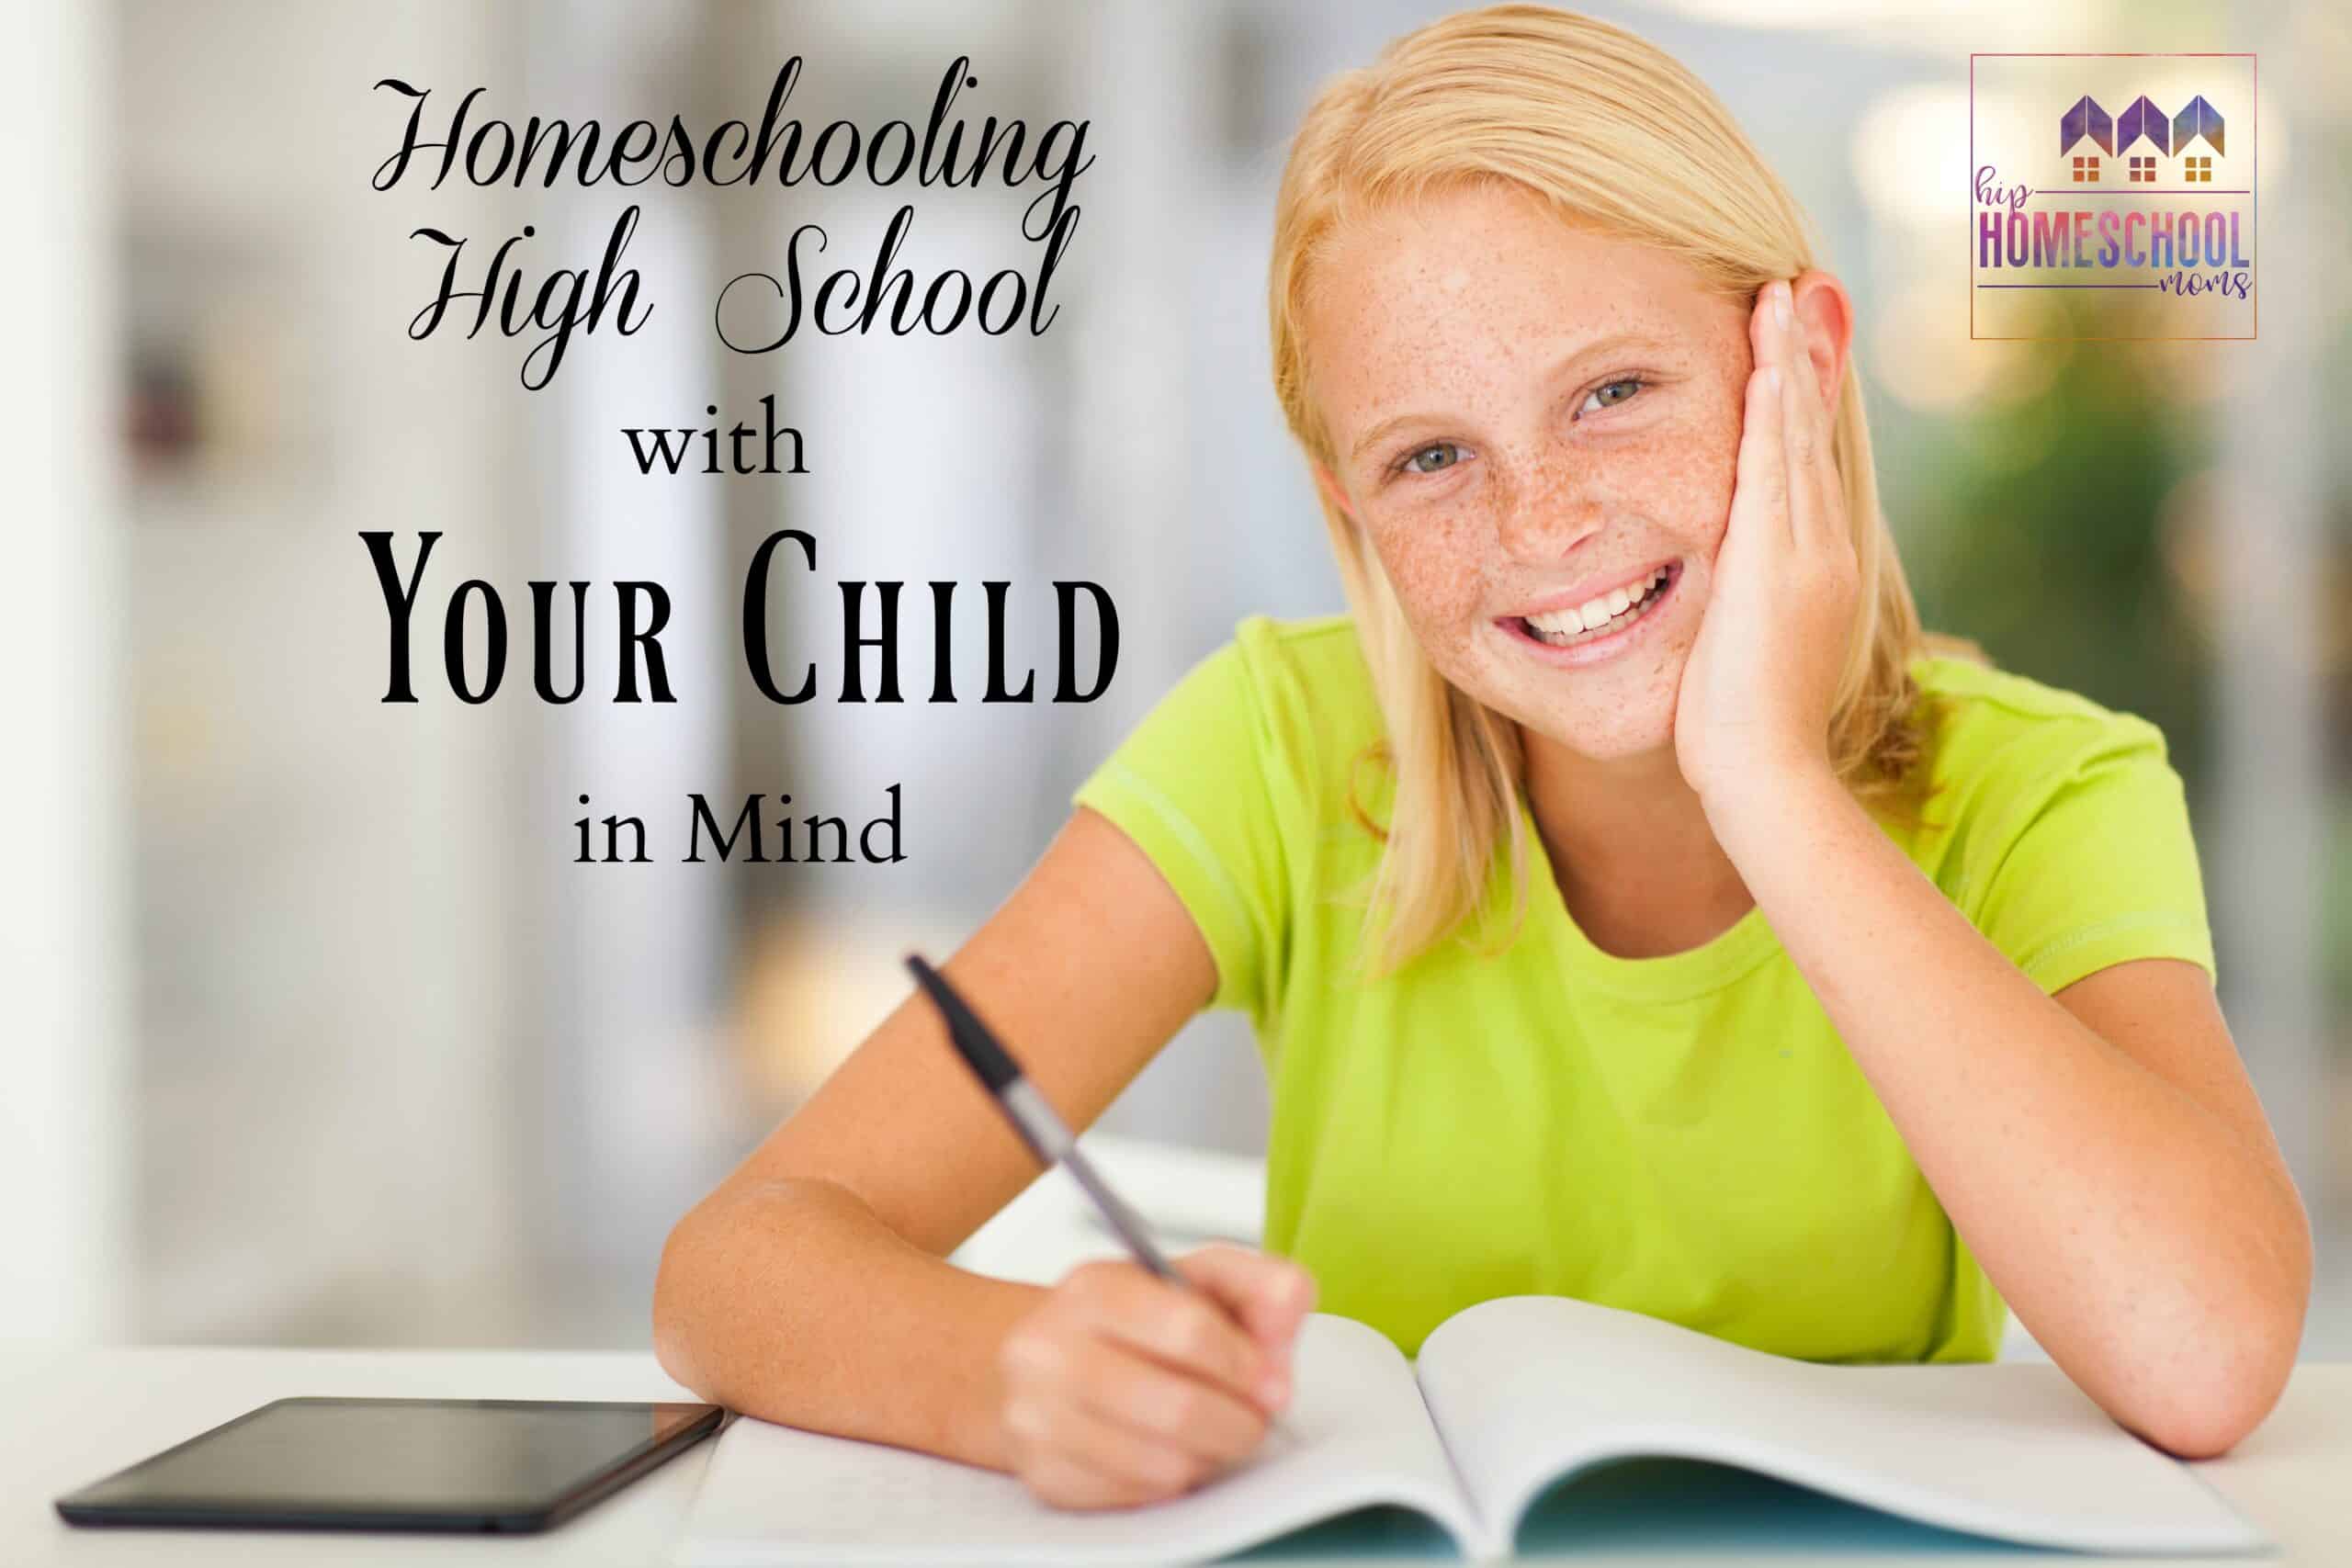 Homeschooling High School with YOUR CHILD in Mind